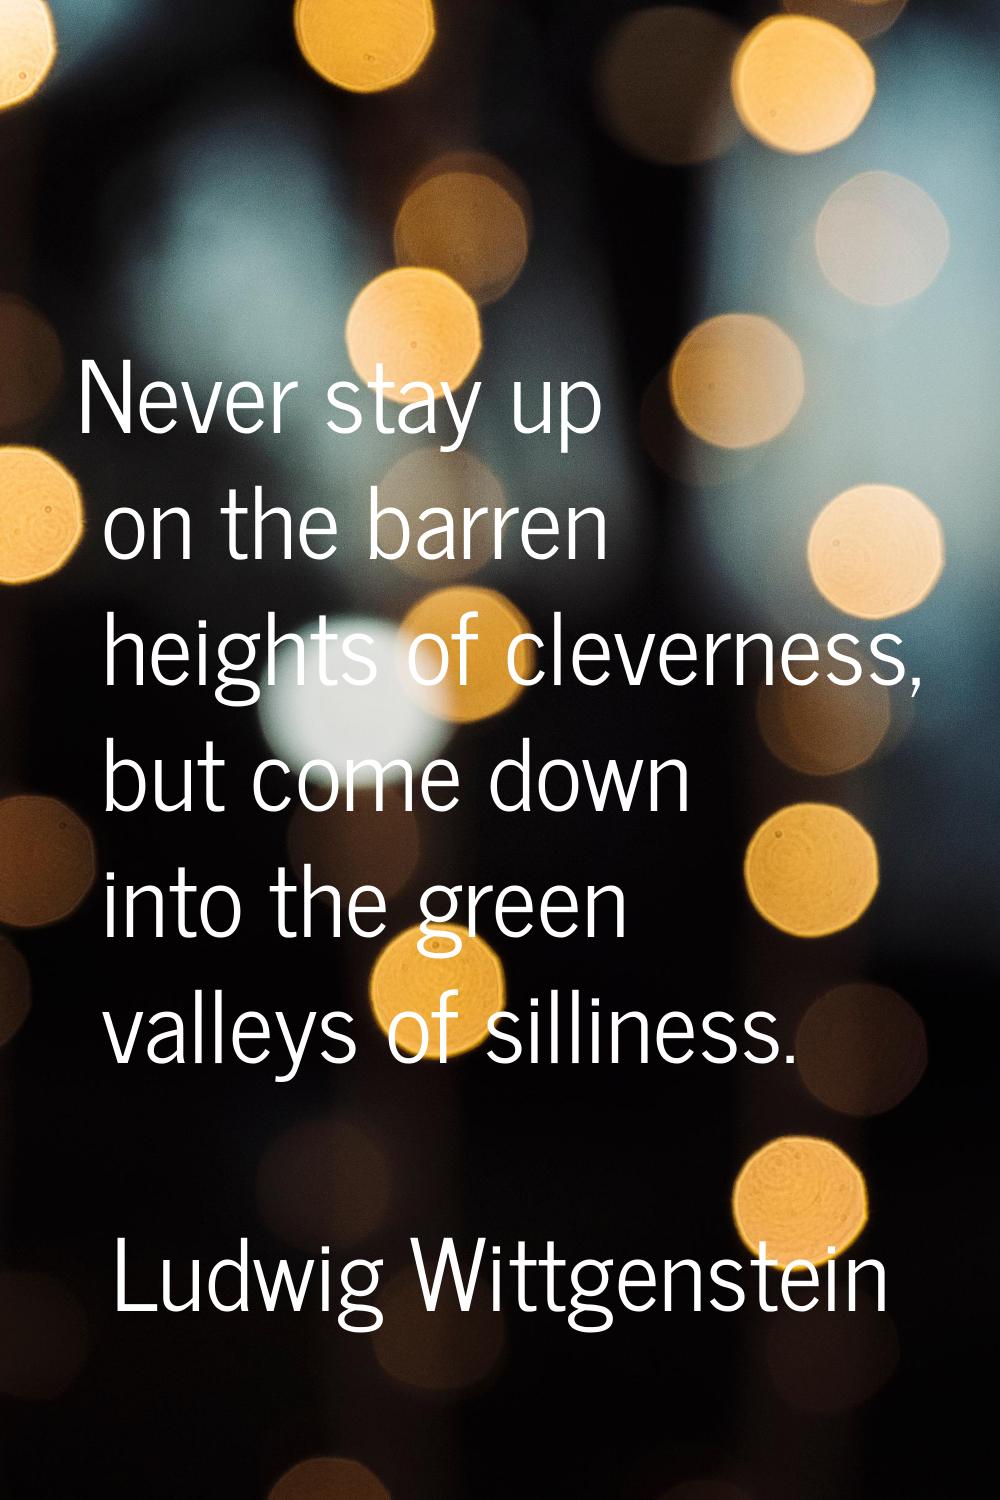 Never stay up on the barren heights of cleverness, but come down into the green valleys of sillines